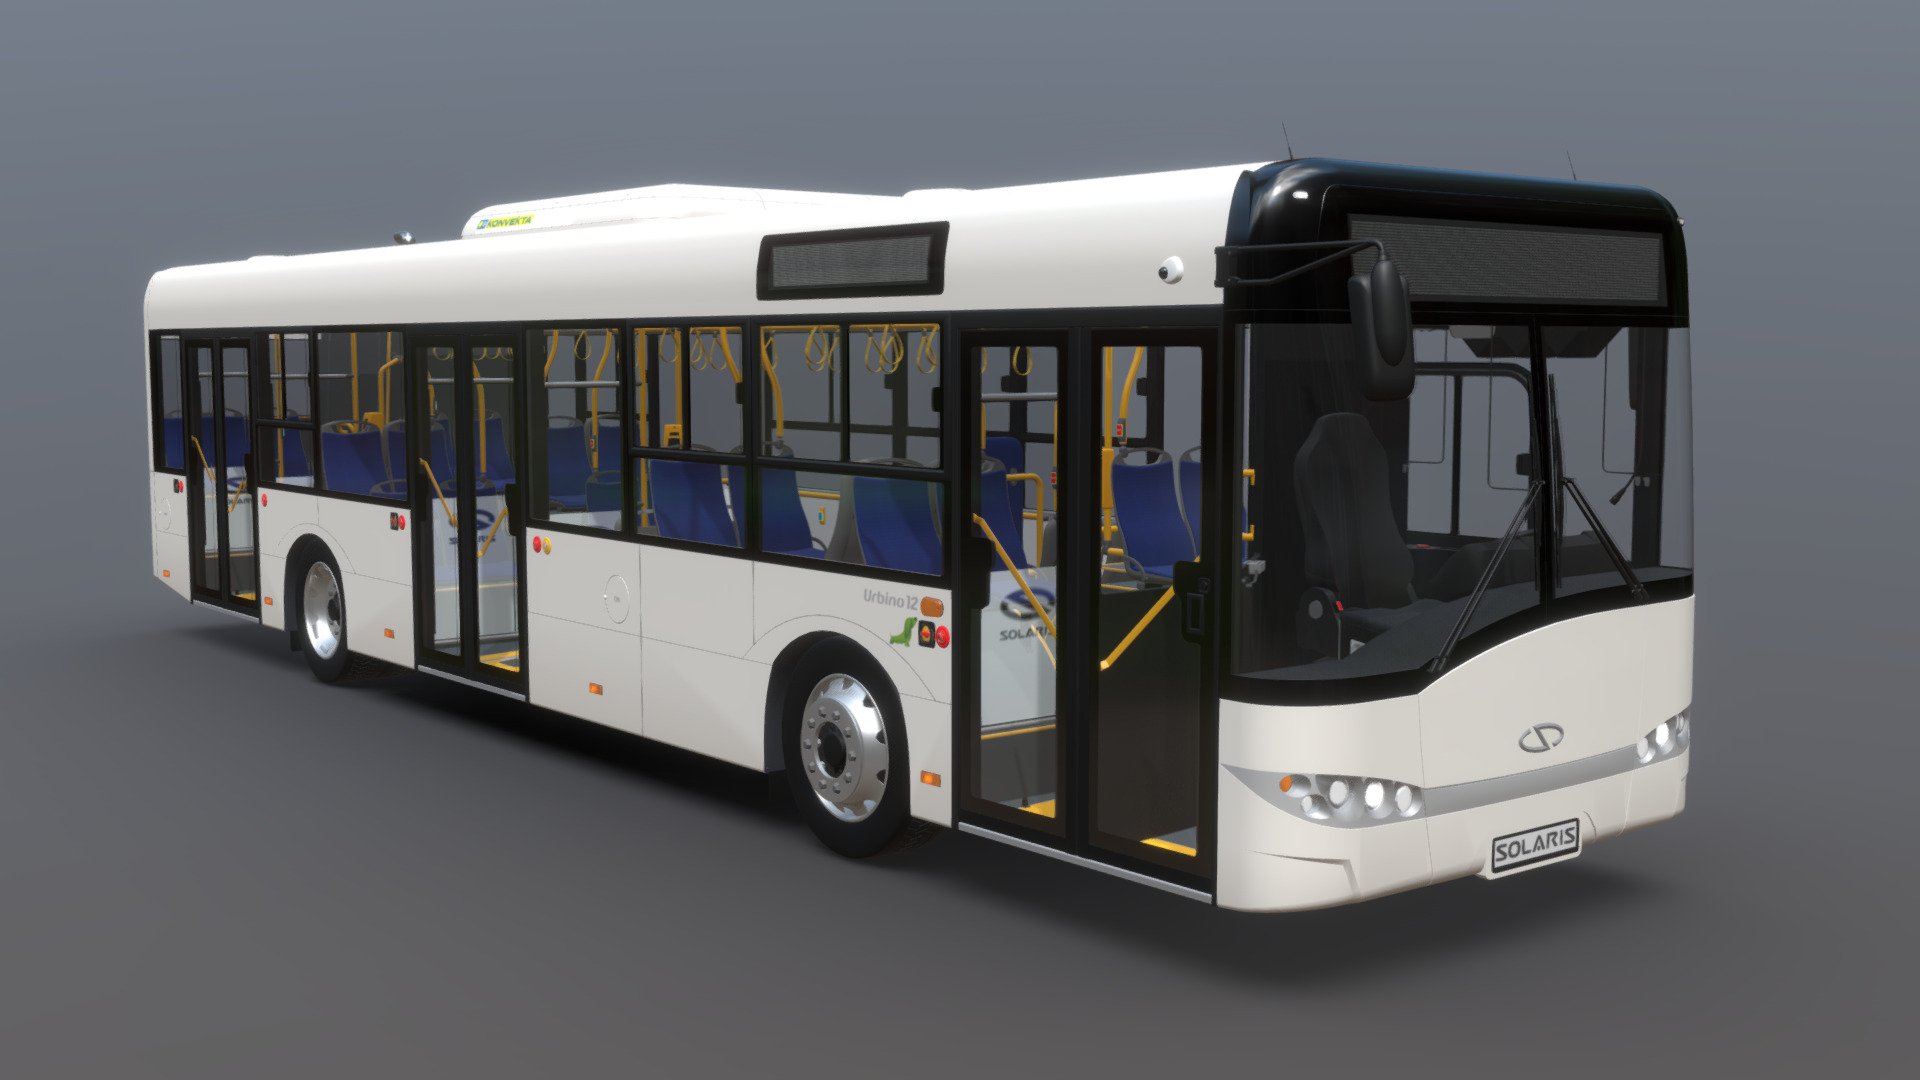 Solaris Urbino 12 is a series of 12.0-metre low-floor buses from the Solaris Urbino series designed for public transport, produced since 1999 by the Polish company Solaris Bus &amp; Coach in Bolechowo near Poznań in Poland. It is the most popular model series in the history of the brand 3d model